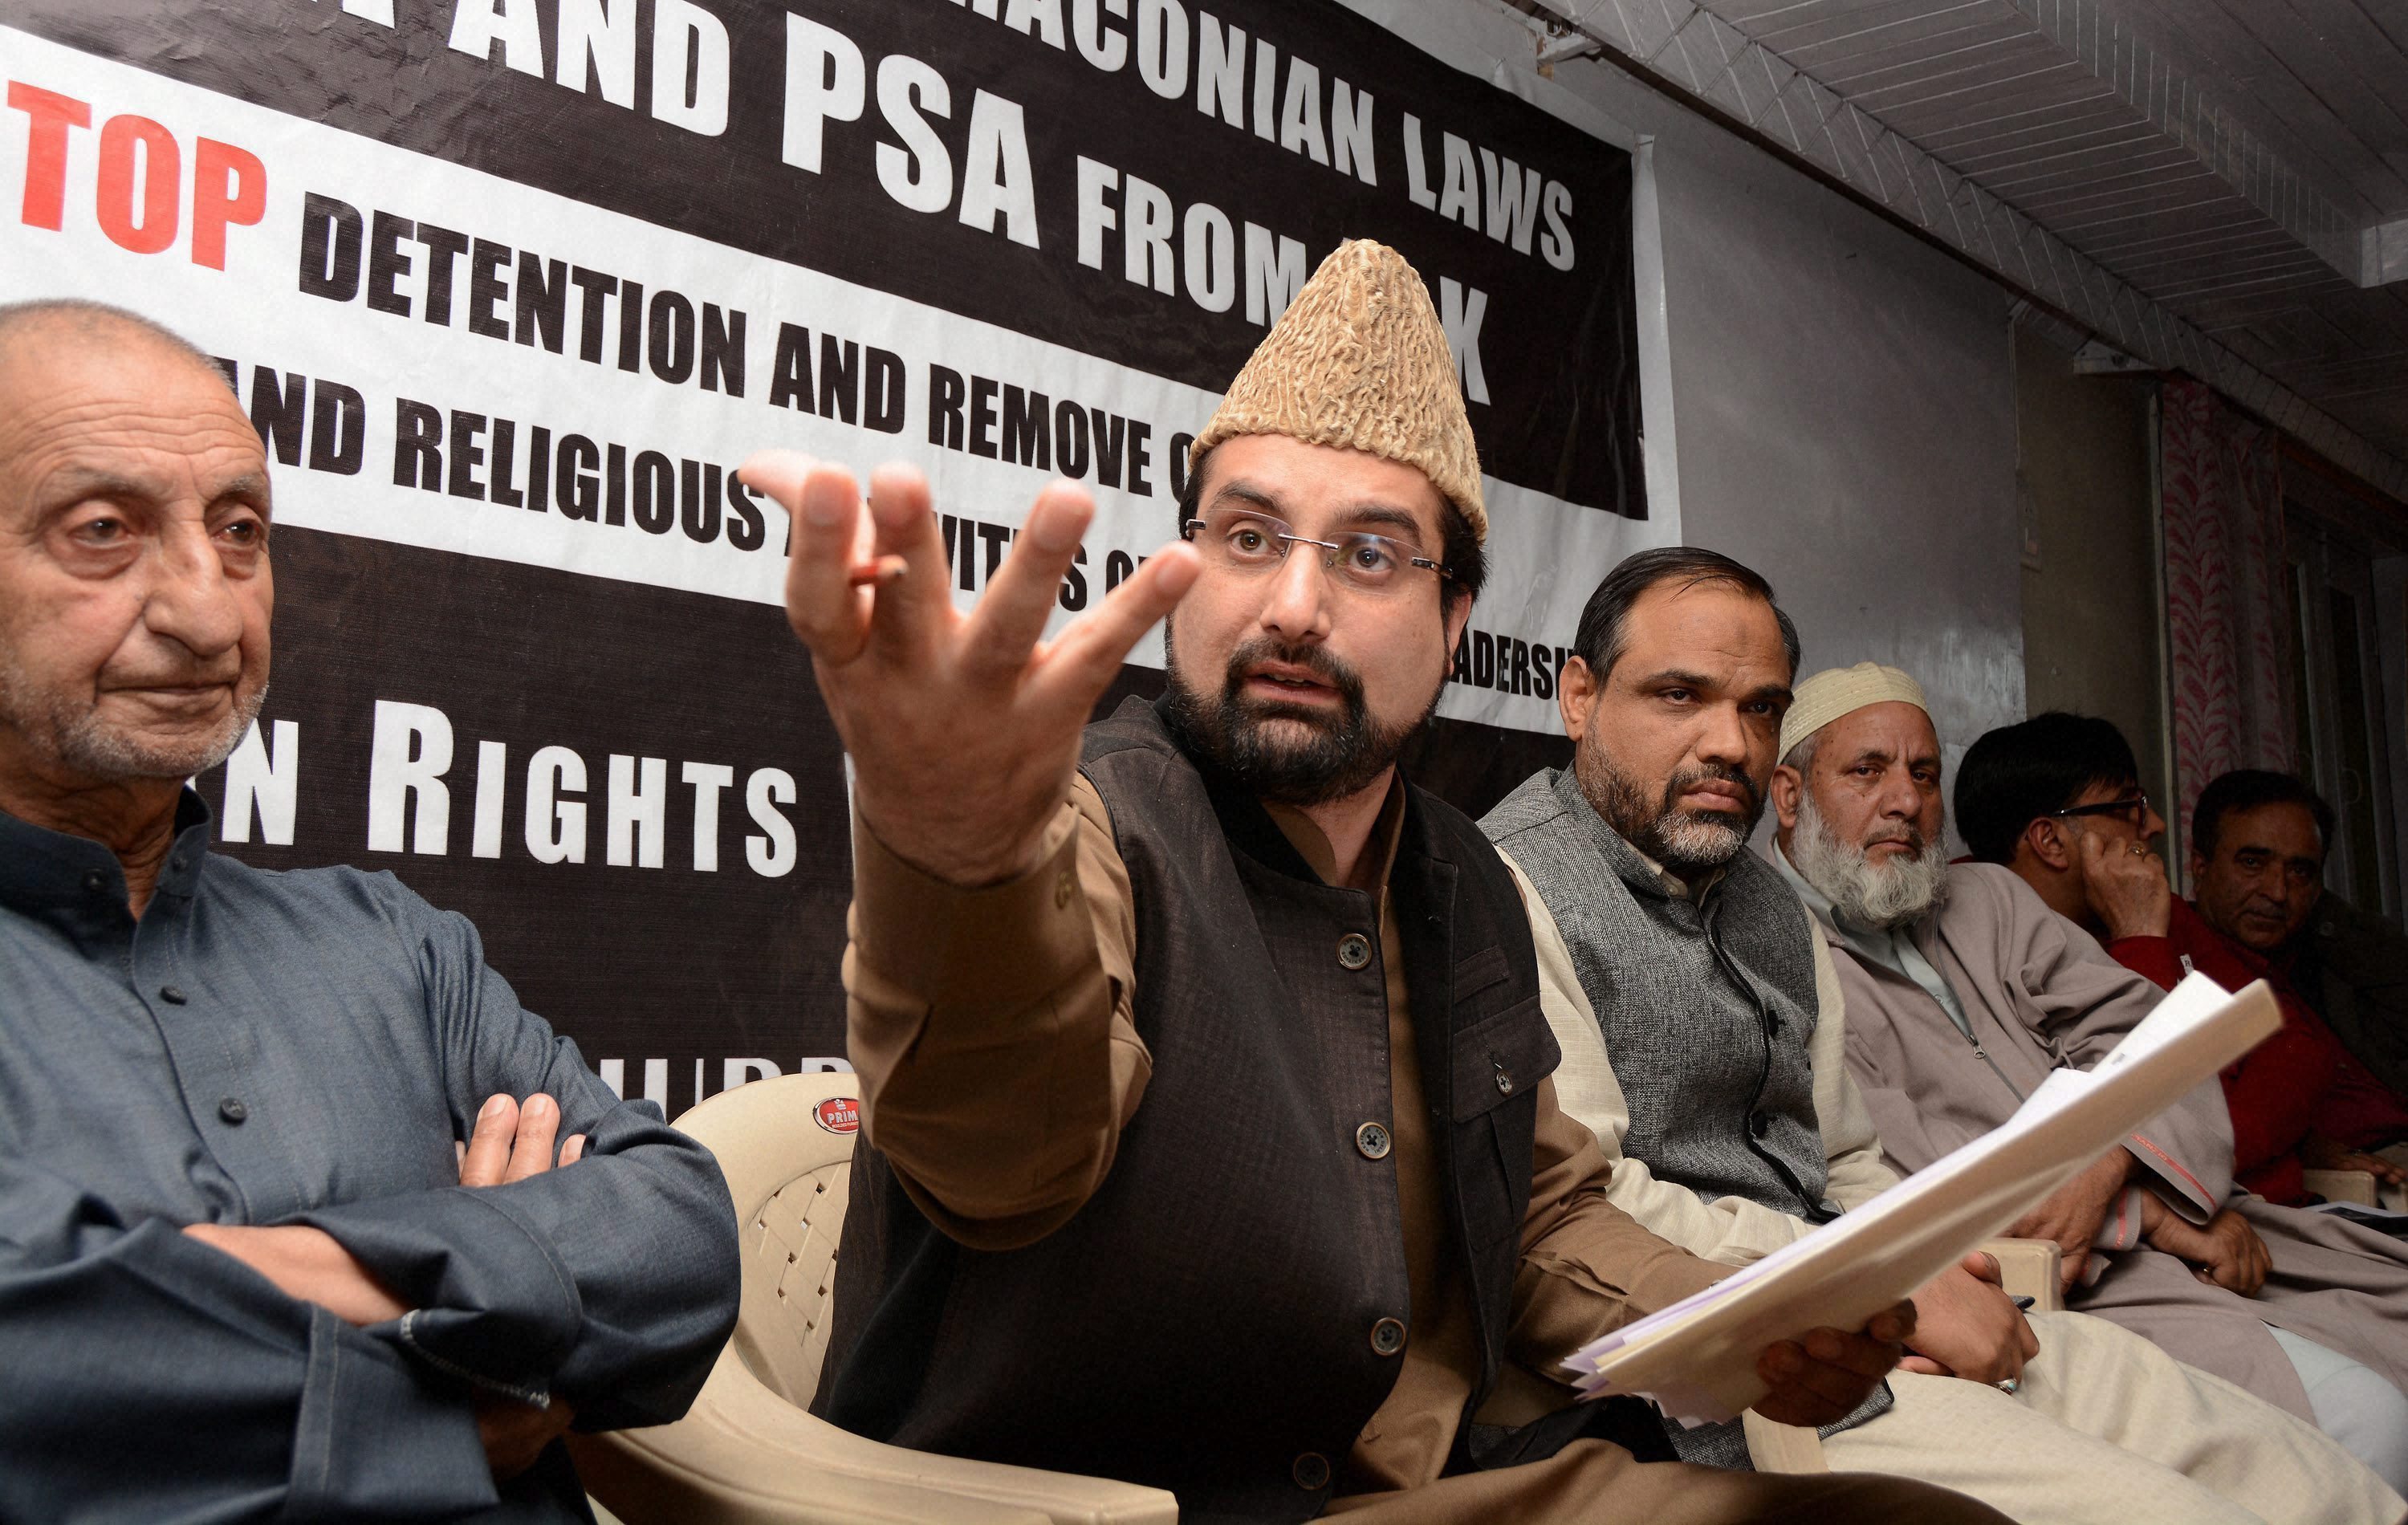 Srinagar: Chairman of Moderate faction of Hurriyat Conference Mirwaiz Umar Farooq along with other leaders at a press conference after he was released from house detention at Hurriyat Headquarters in Srinagar on Monday. PTI Photo (PTI5_2_2016_000172A)